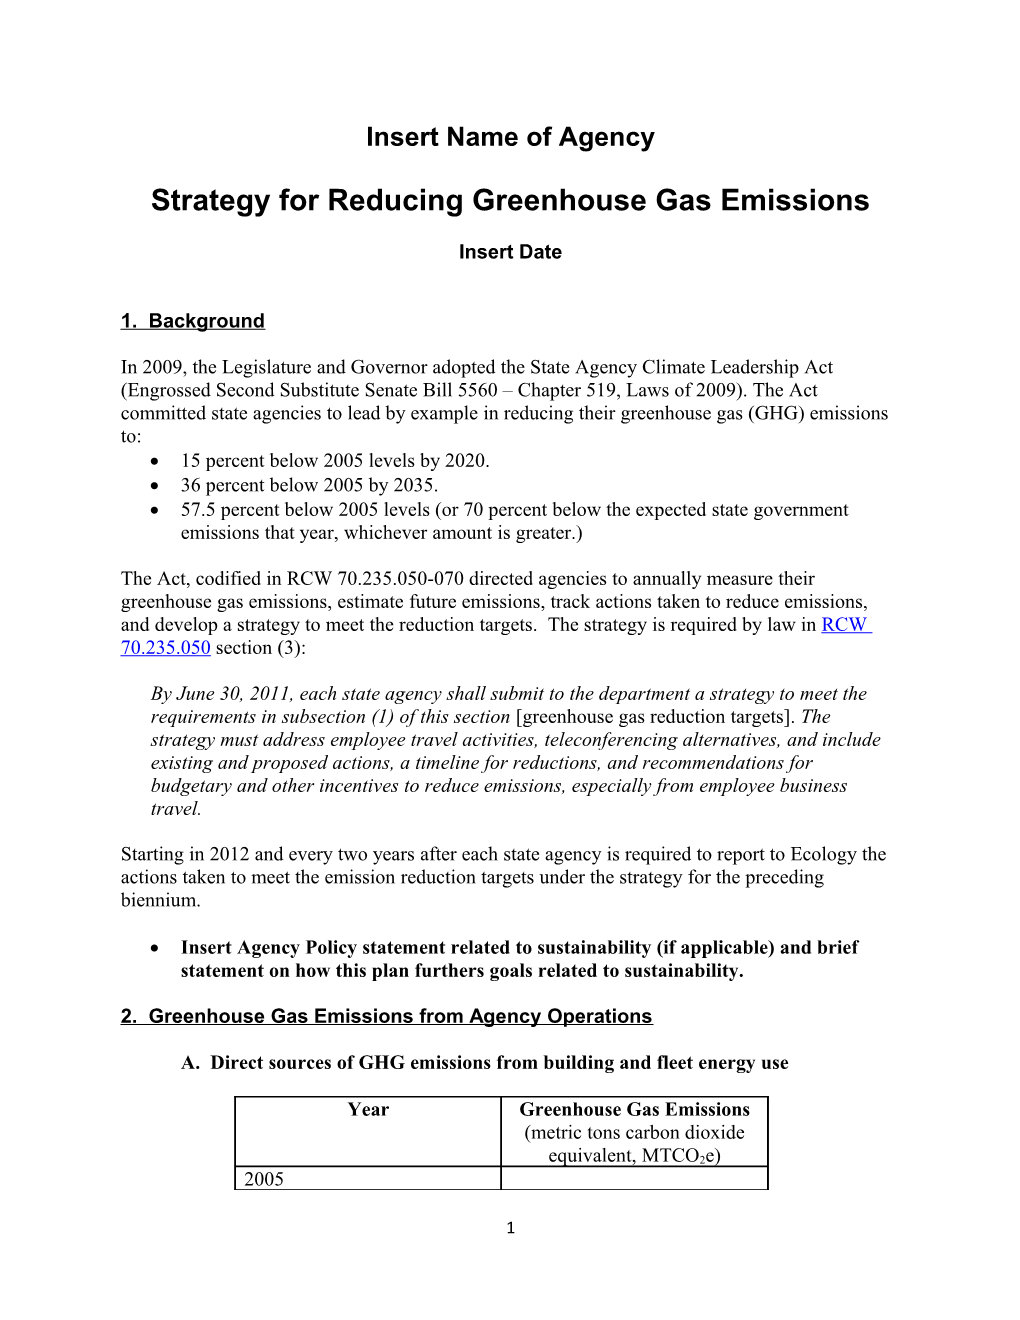 Strategy for Reducing Greenhouse Gas Emissions